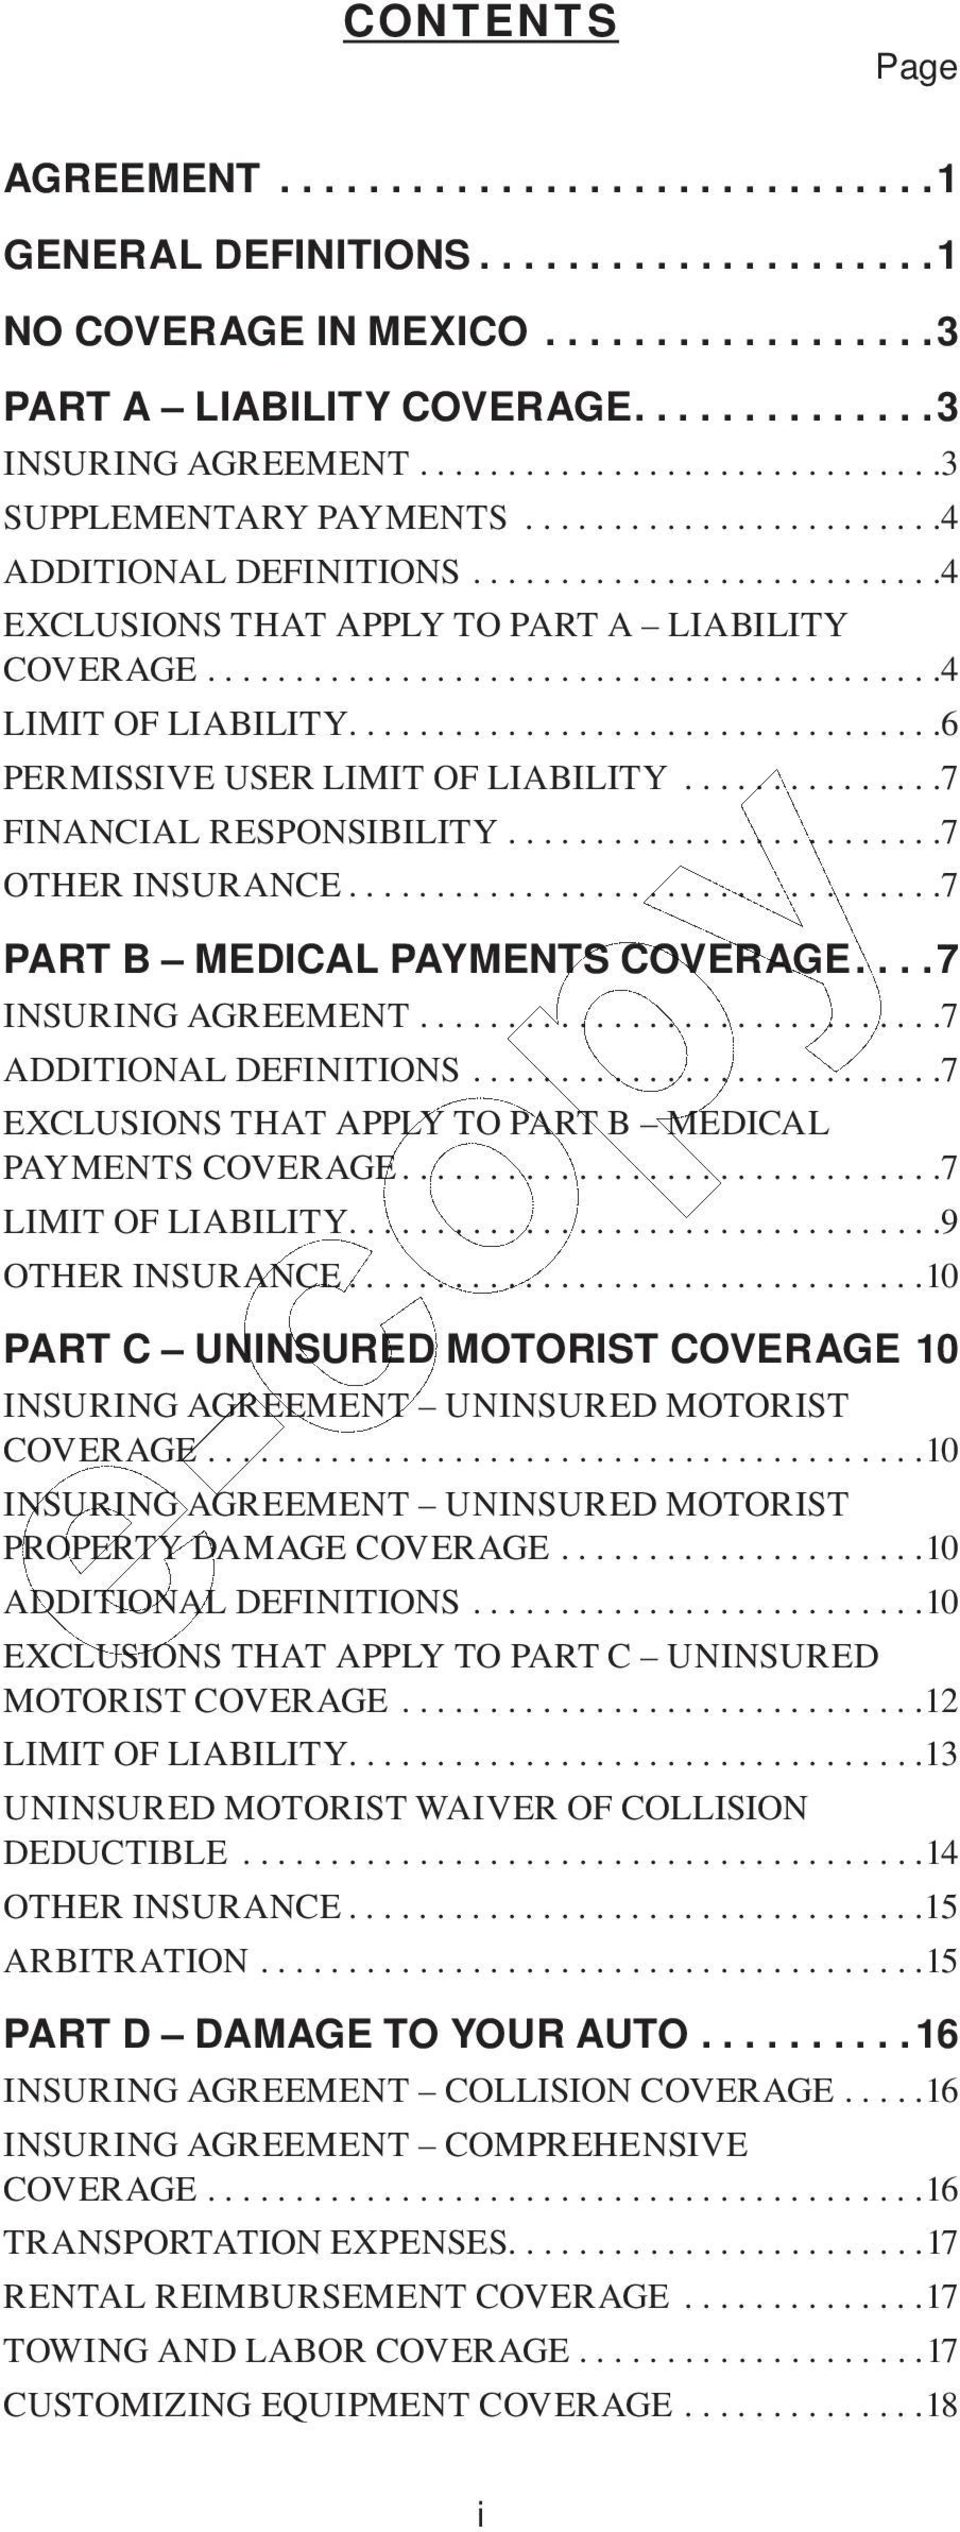 .........................................4 LIMIT OF LIABILITY..................................6 PERMISSIVE USER LIMIT OF LIABILITY...............7 FINANCIAL RESPONSIBILITY.........................7 OTHER INSURANCE.